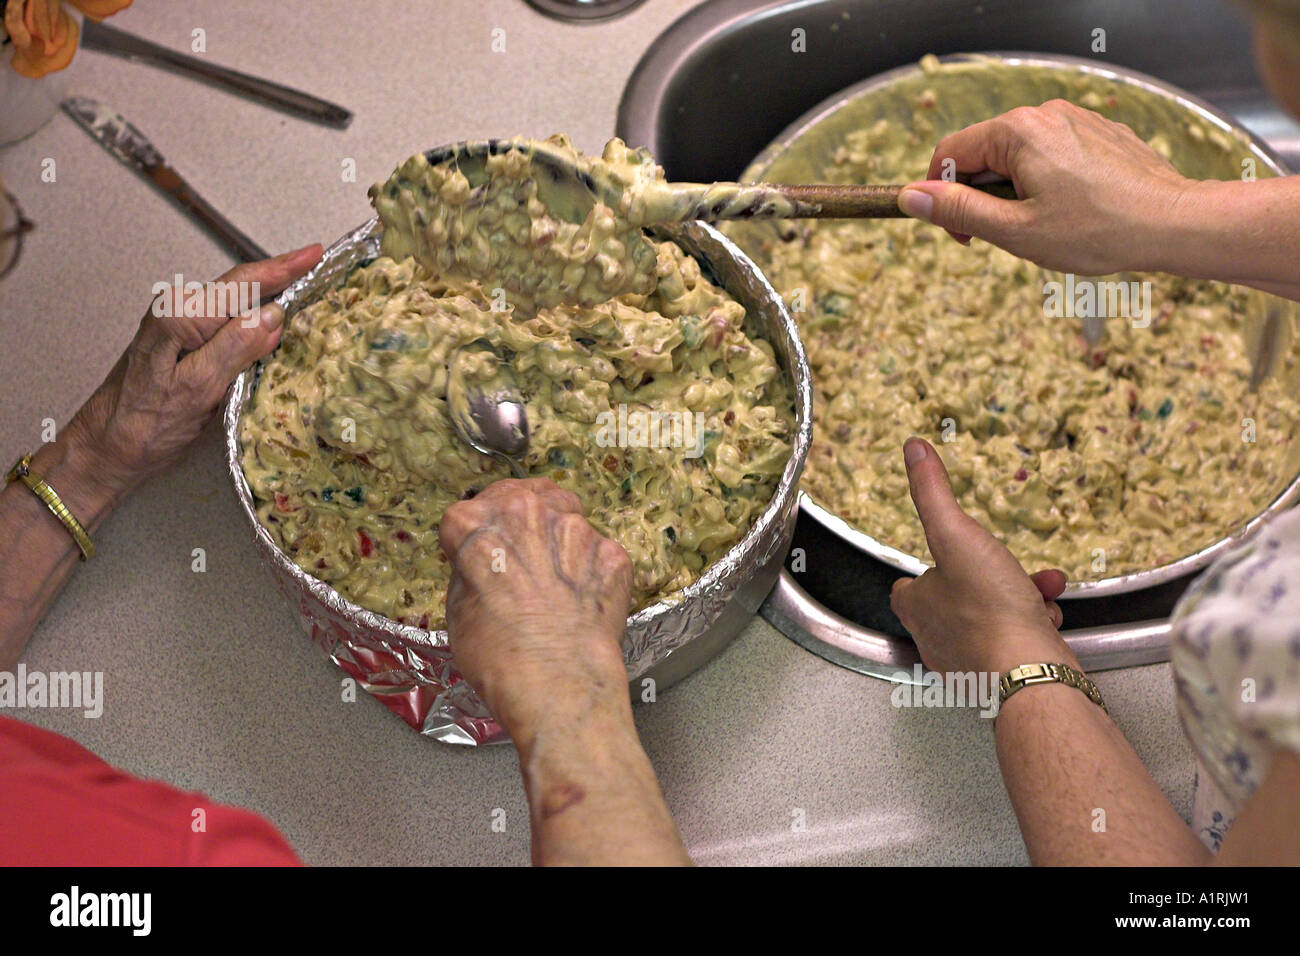 The four hands of a mother and daughter mix a wedding fruit cake and scoop it into a cake pan Stock Photo